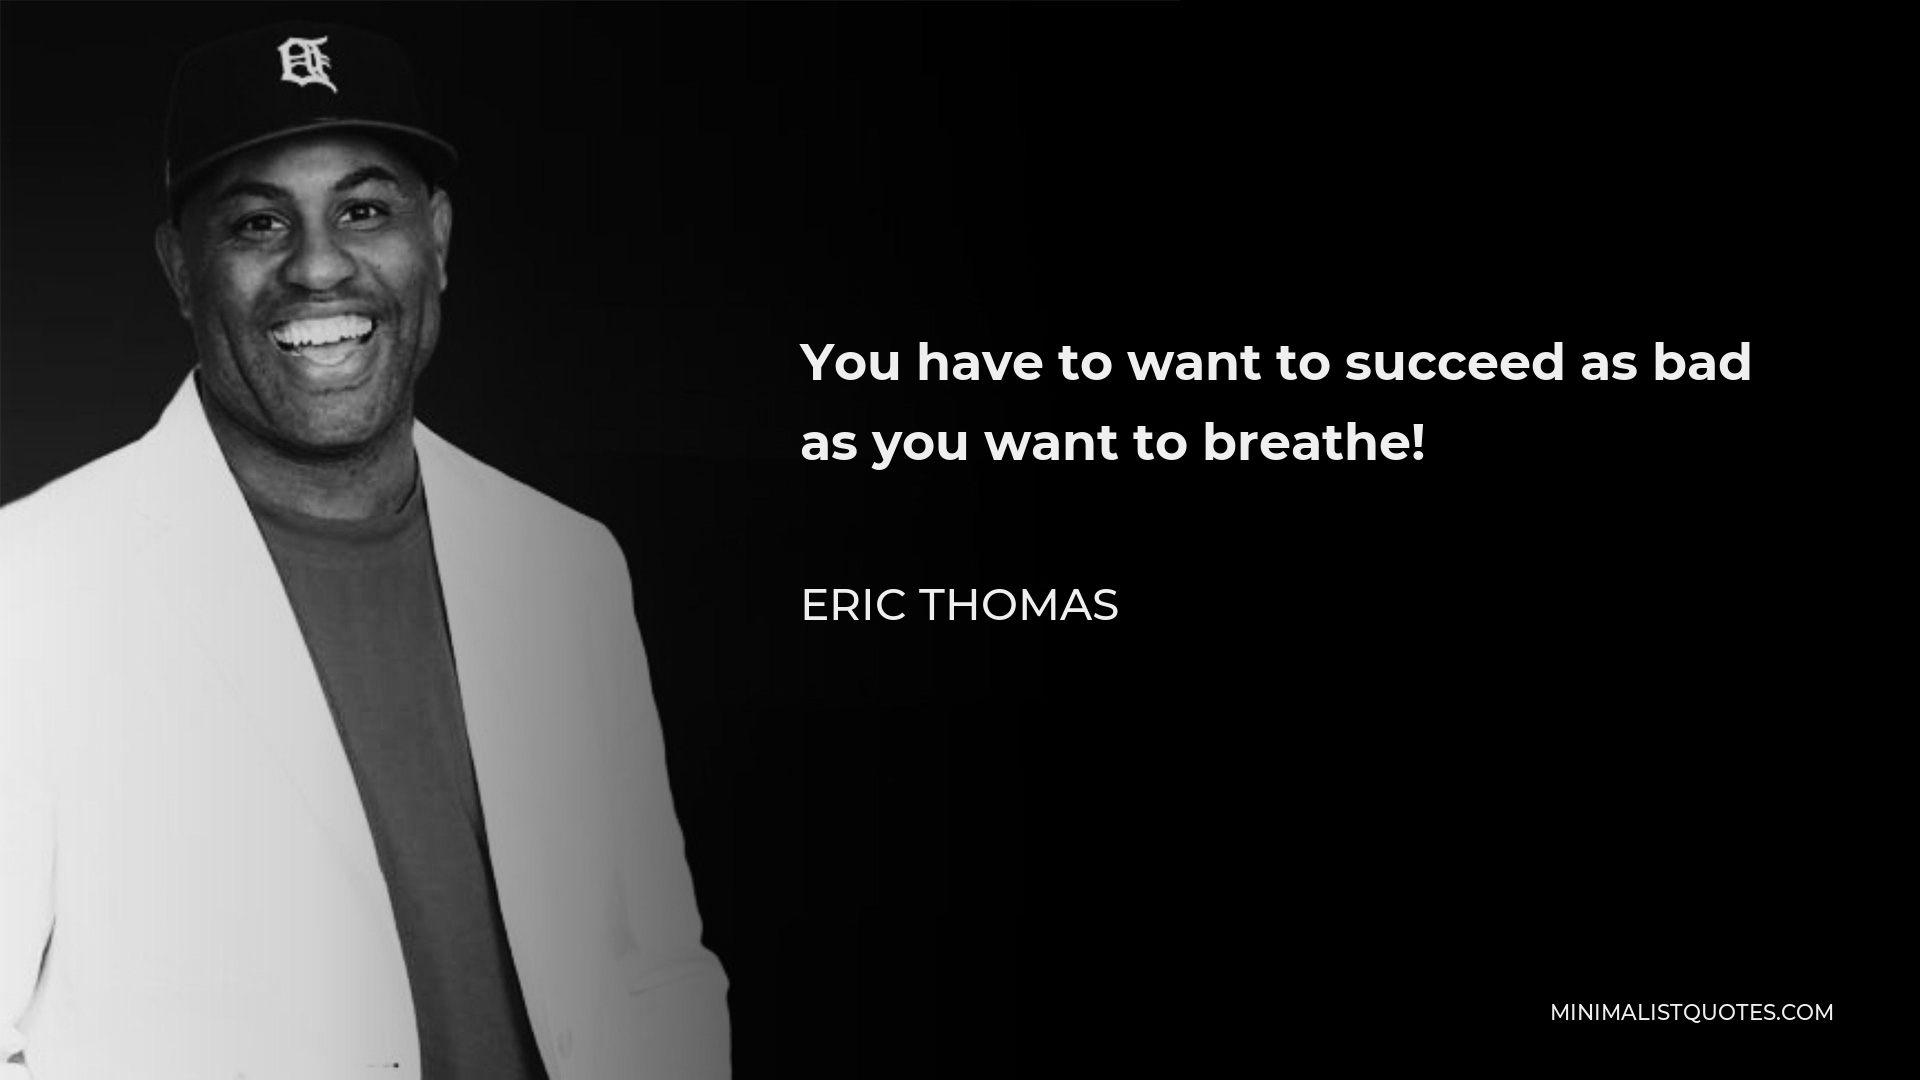 Eric Thomas Quote - You have to want to succeed as bad as you want to breathe!